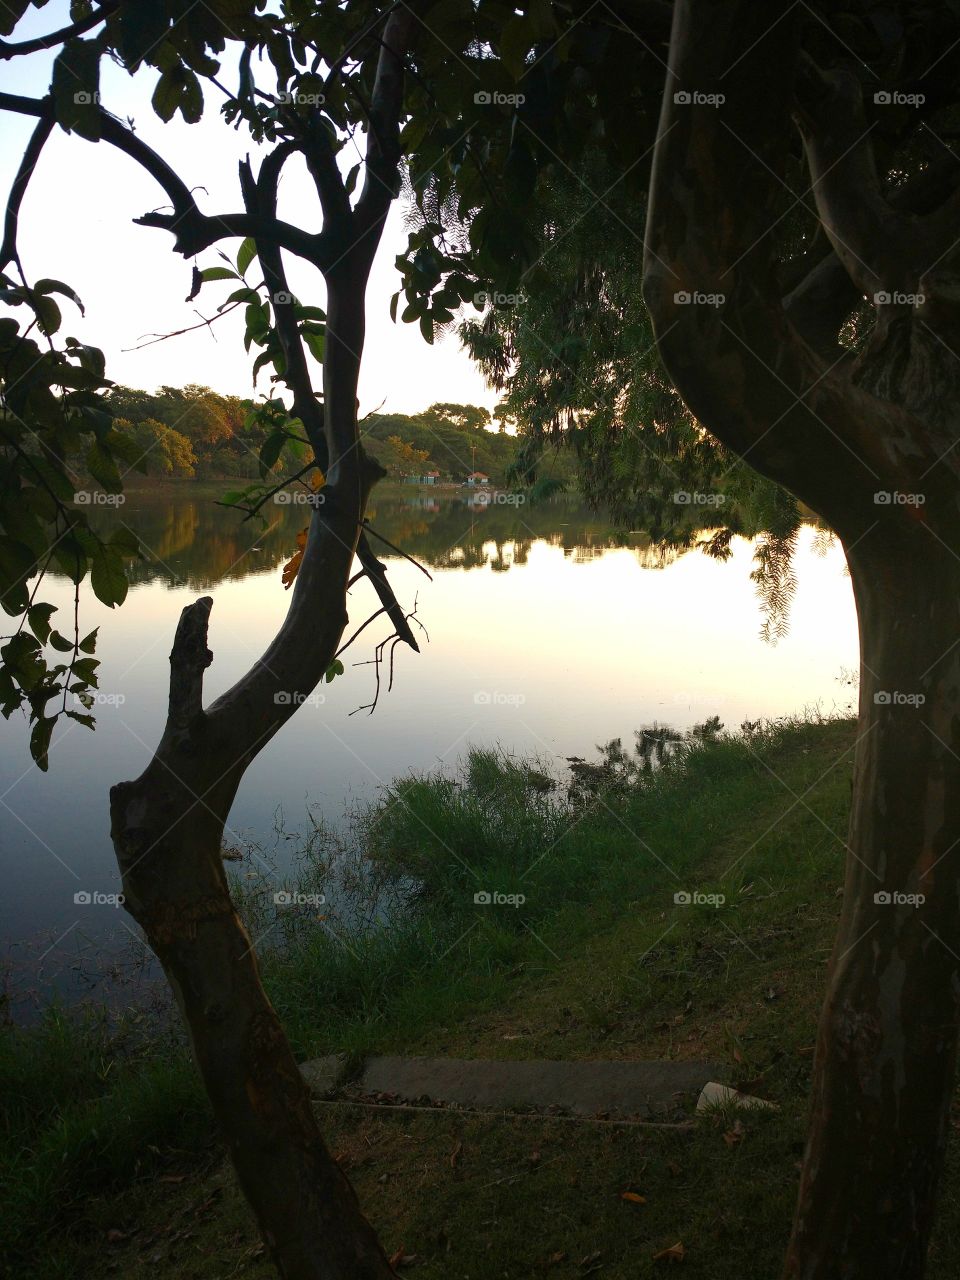 The trees and the lake